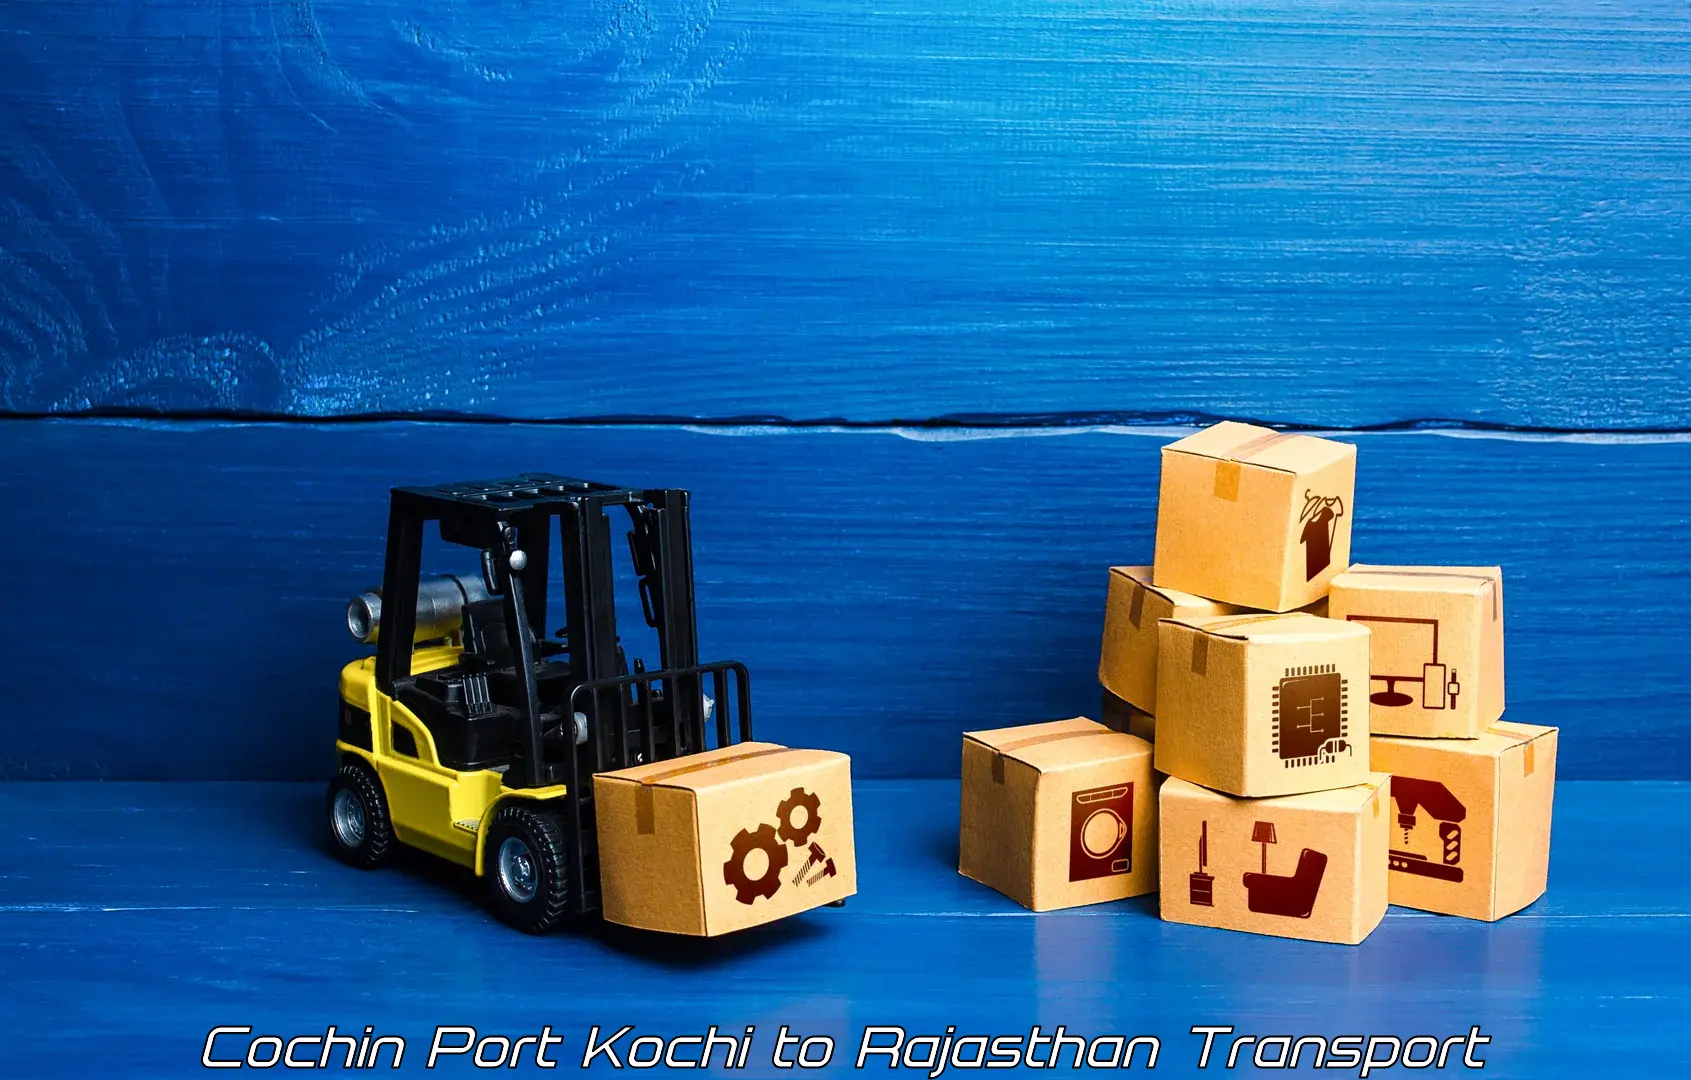 Parcel transport services Cochin Port Kochi to Rajasthan